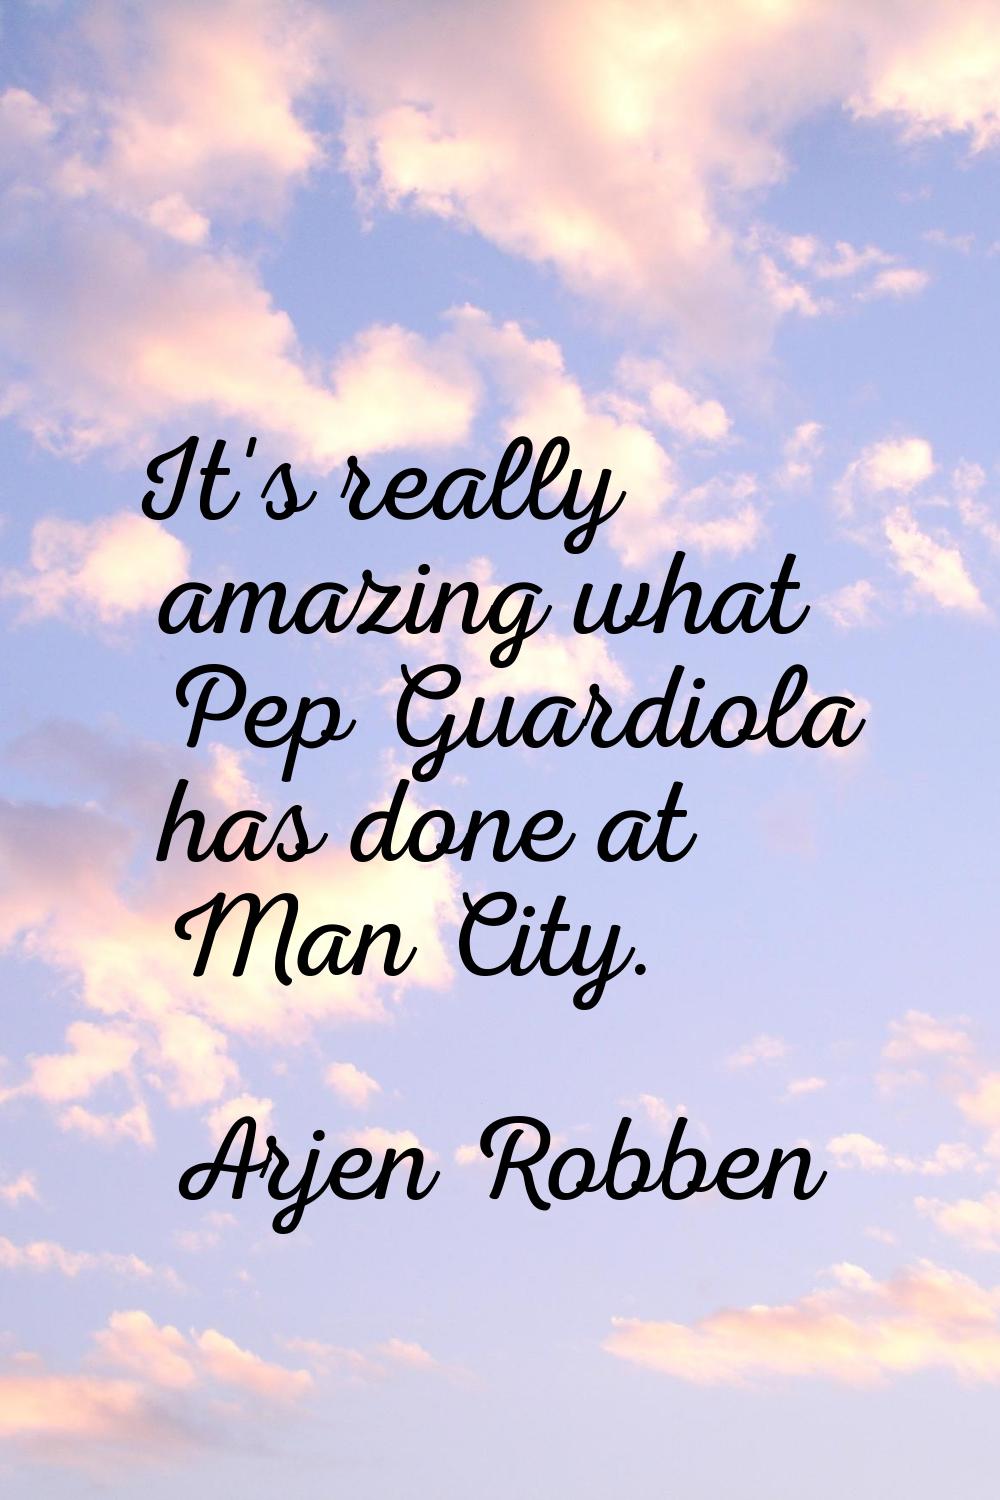 It's really amazing what Pep Guardiola has done at Man City.